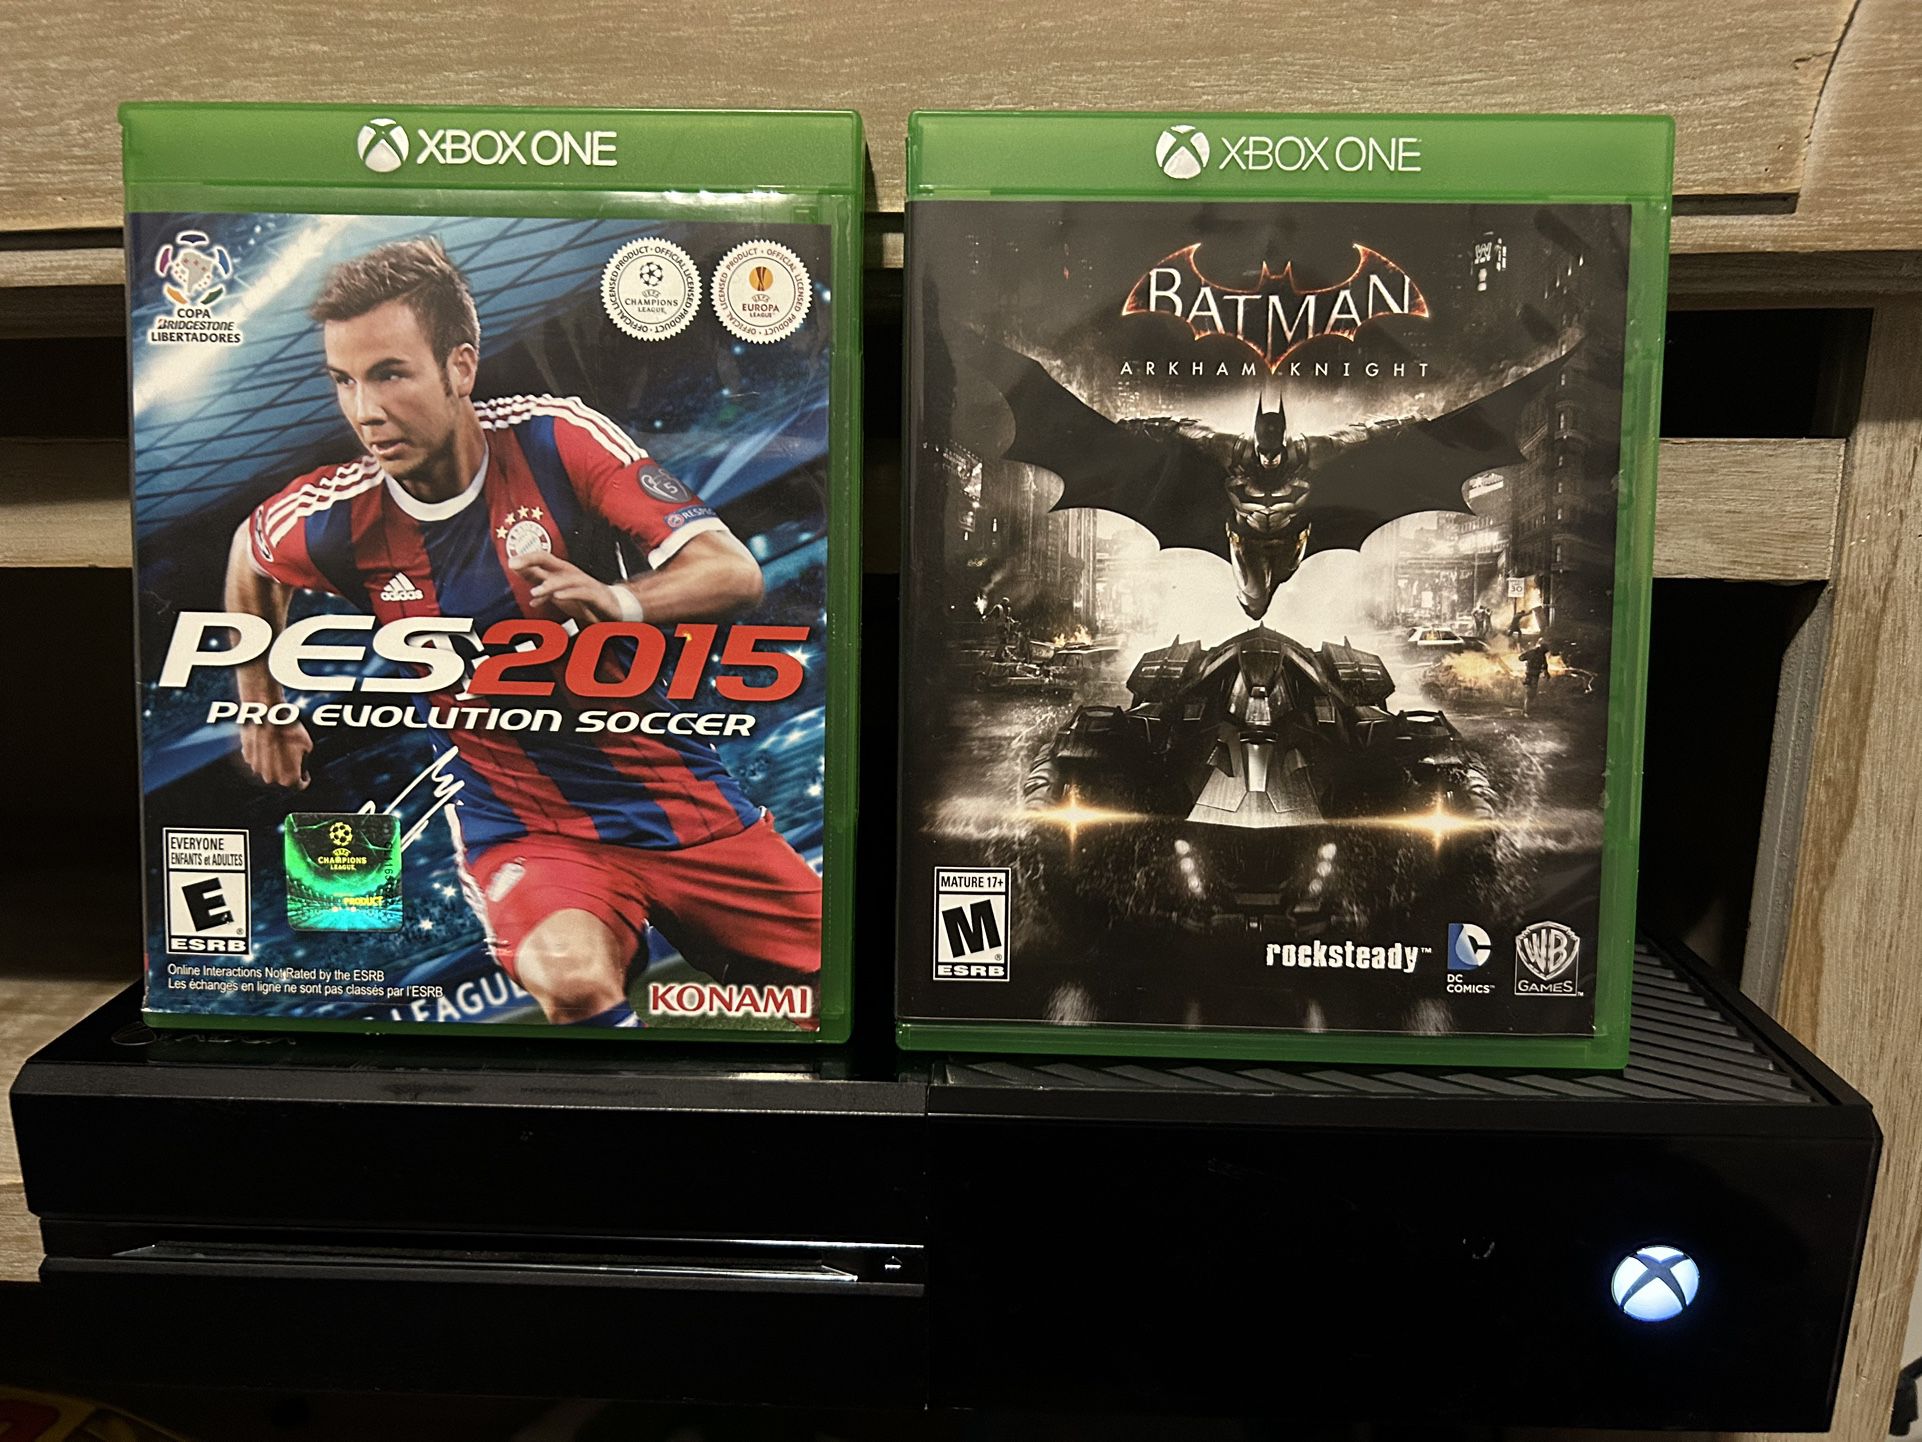 Xbox One With 2 Games included 